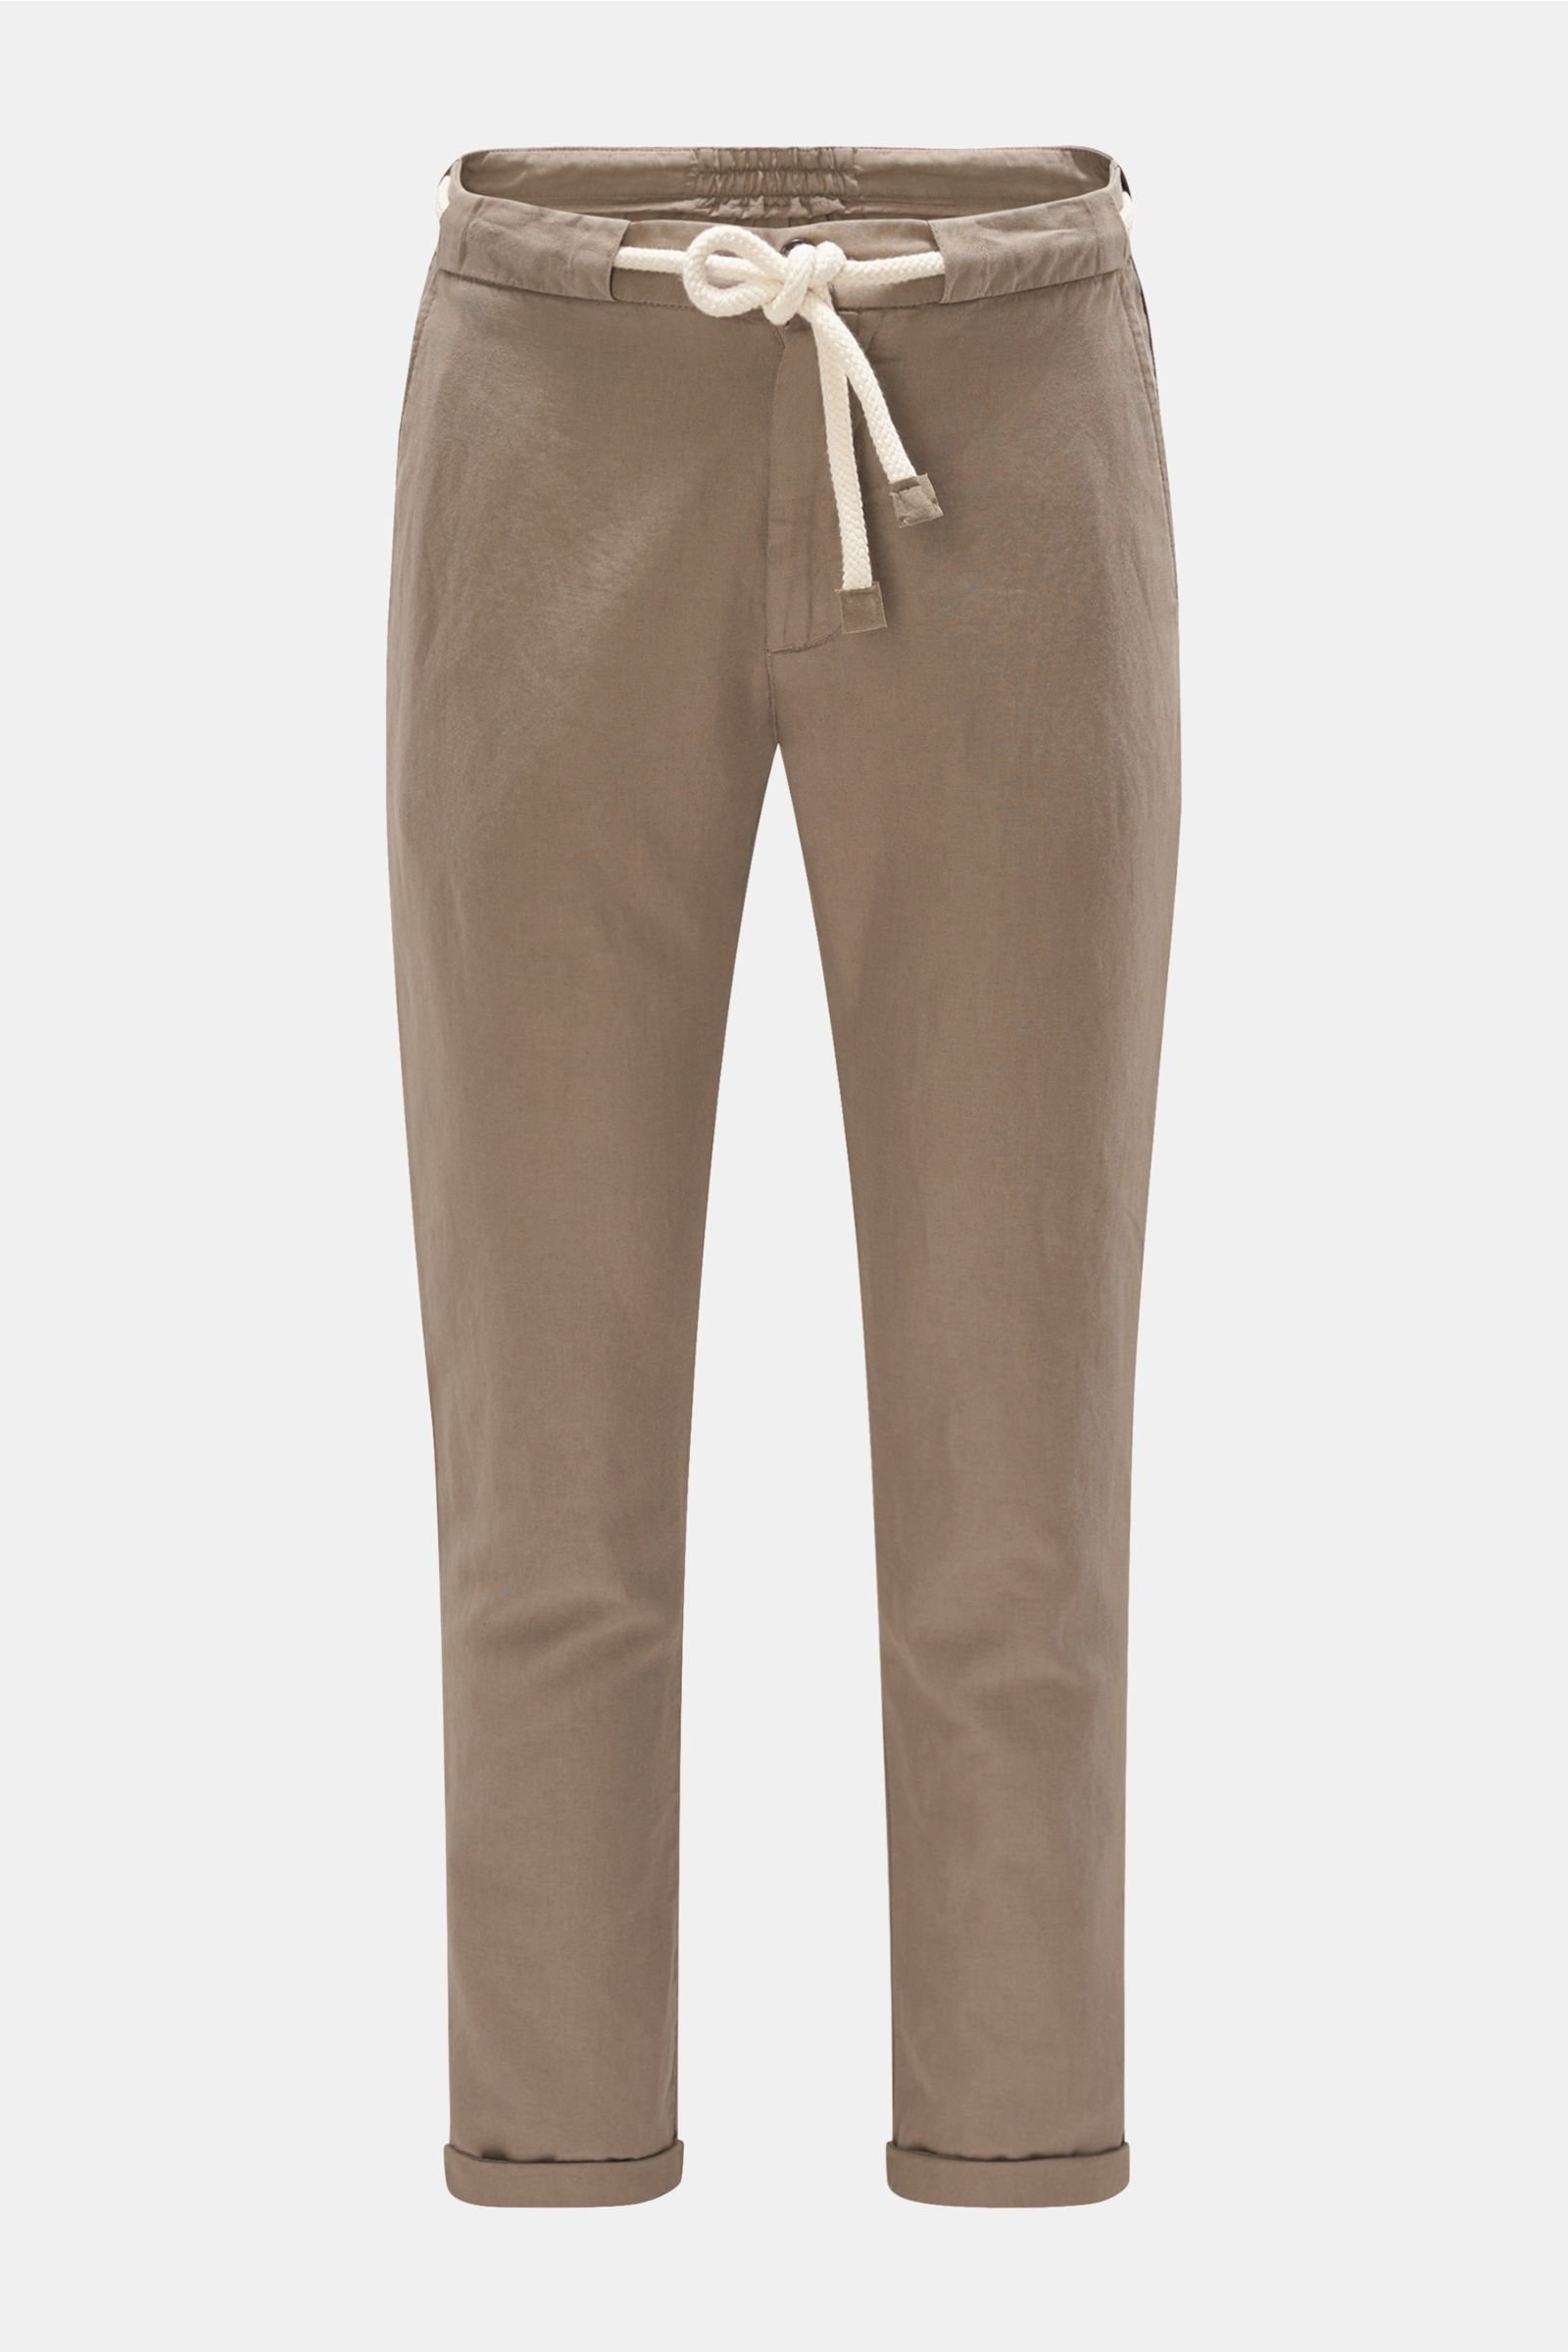 Trousers grey-brown